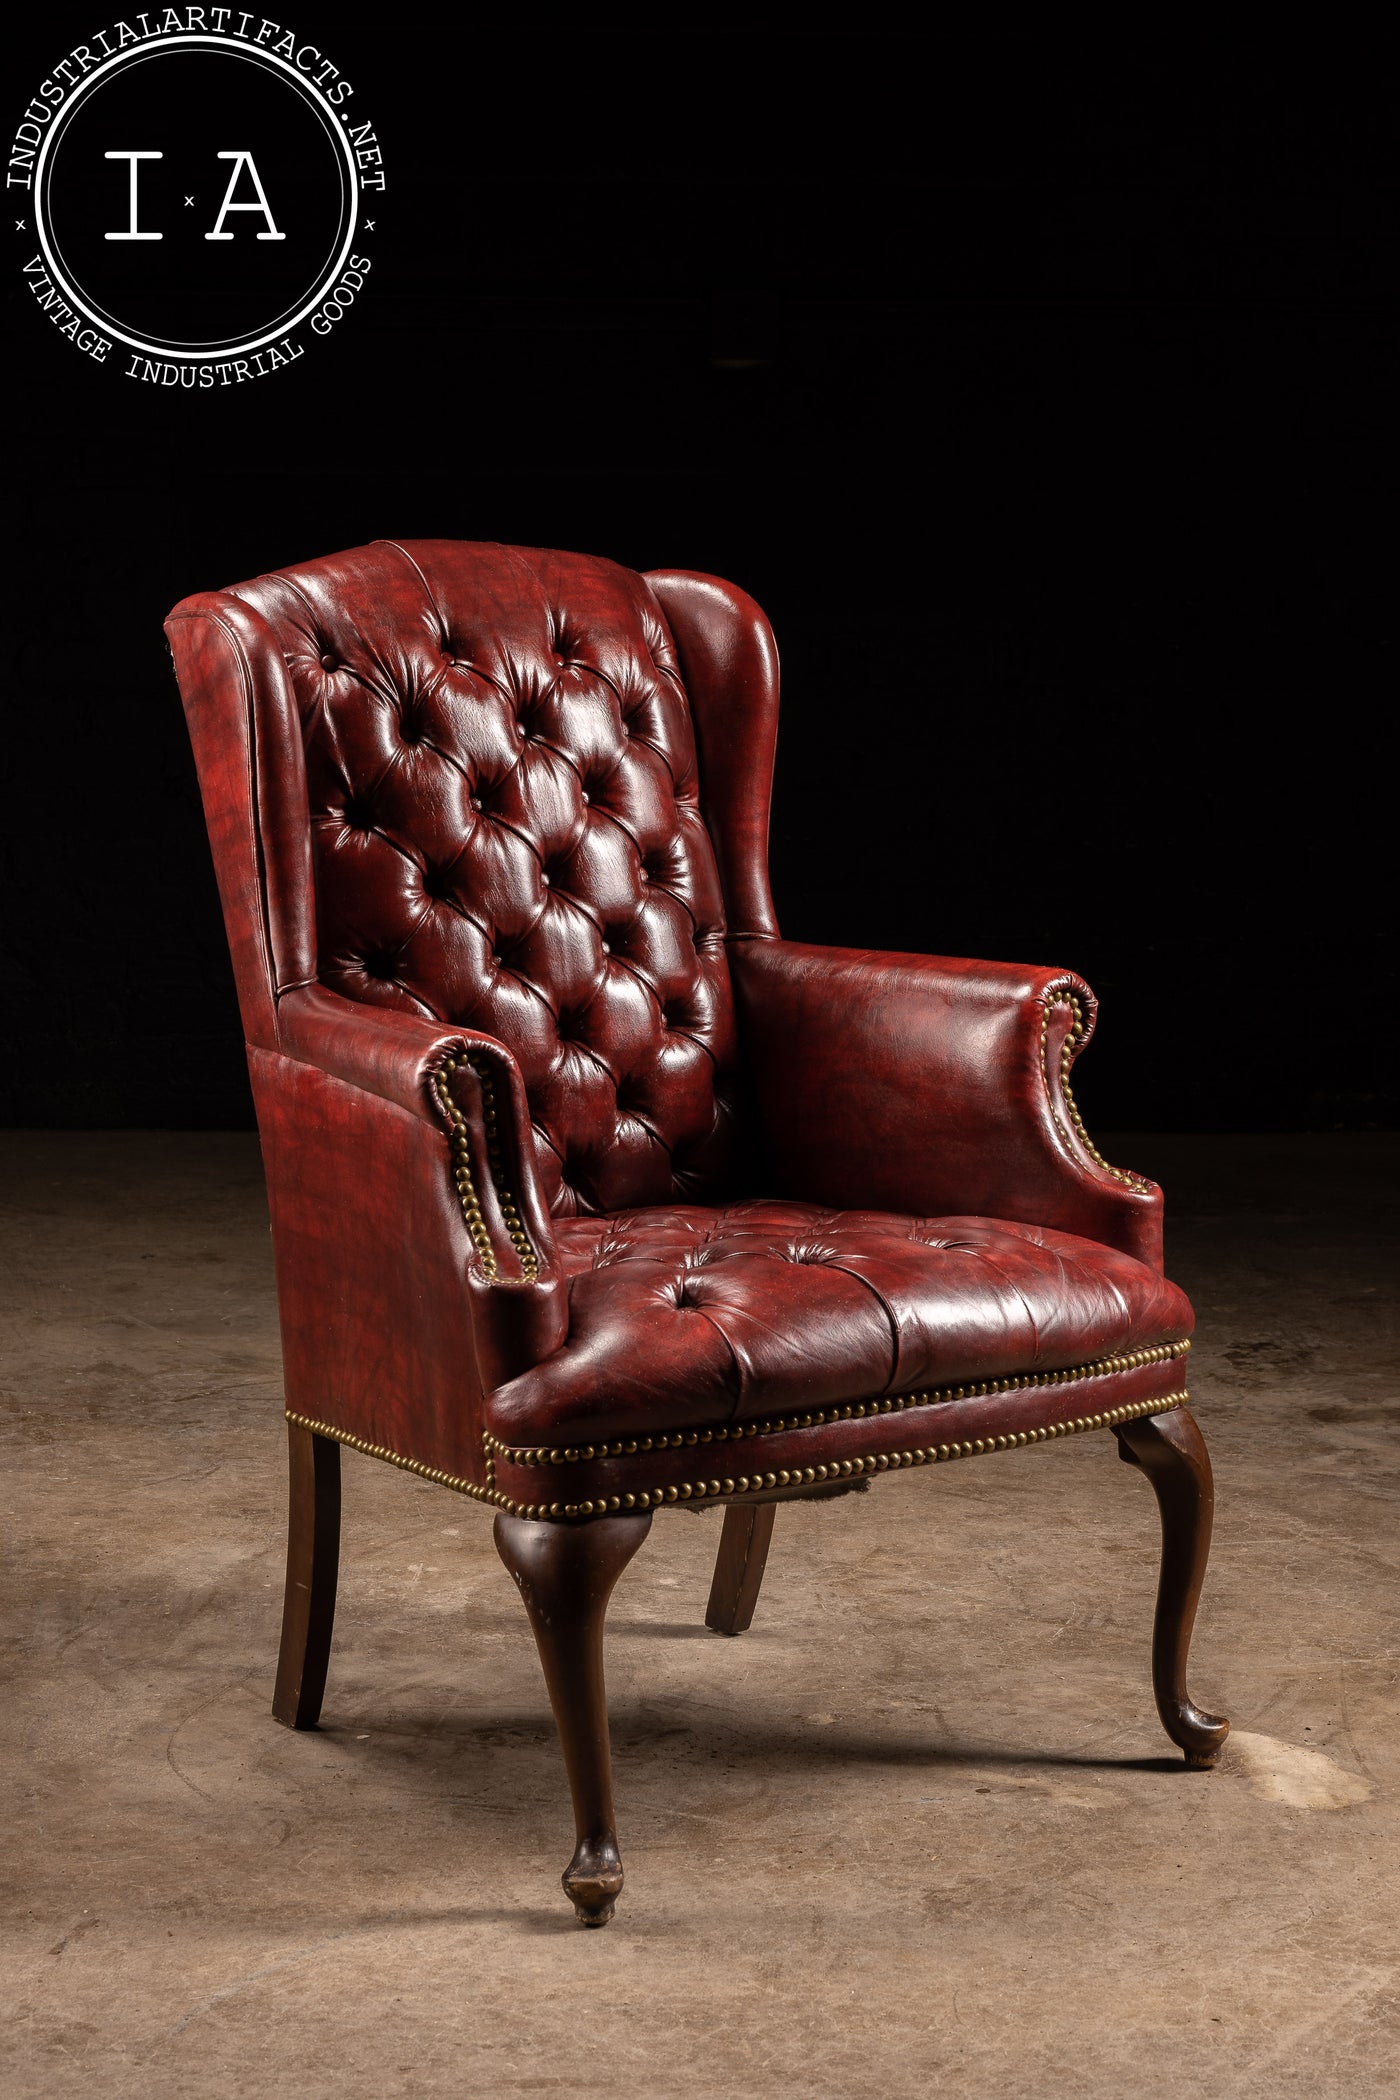 Vintage Tufted Red Leather Wingback Chair